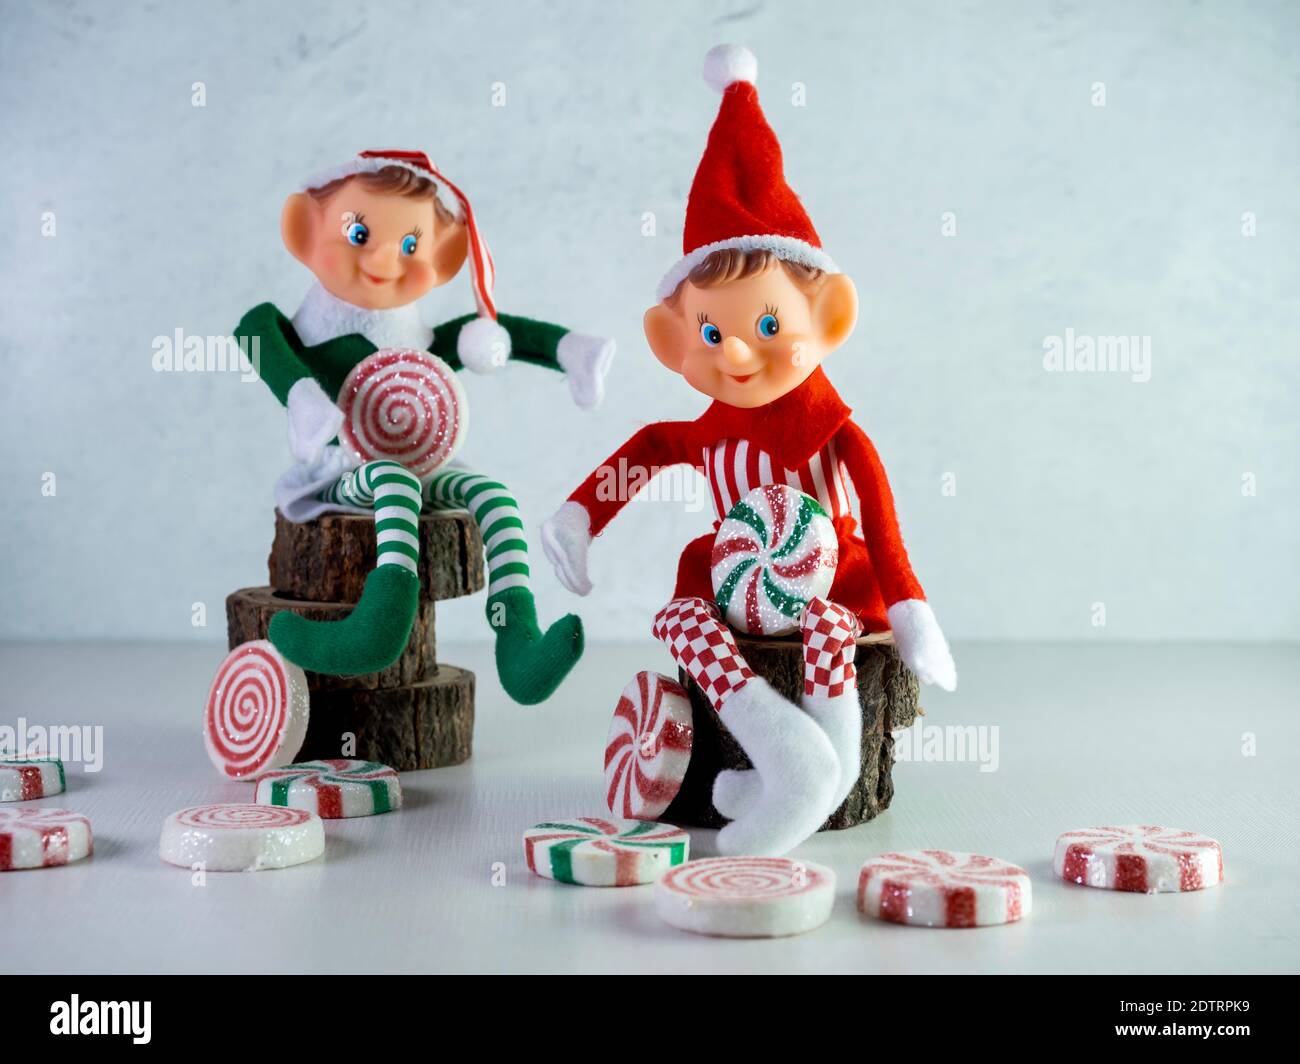 Two Christmas Elves with Red and Green Outfits Sitting on Wood, holding large pieces of candy with more candy scattered around.  Holiday decor, Santa Stock Photo